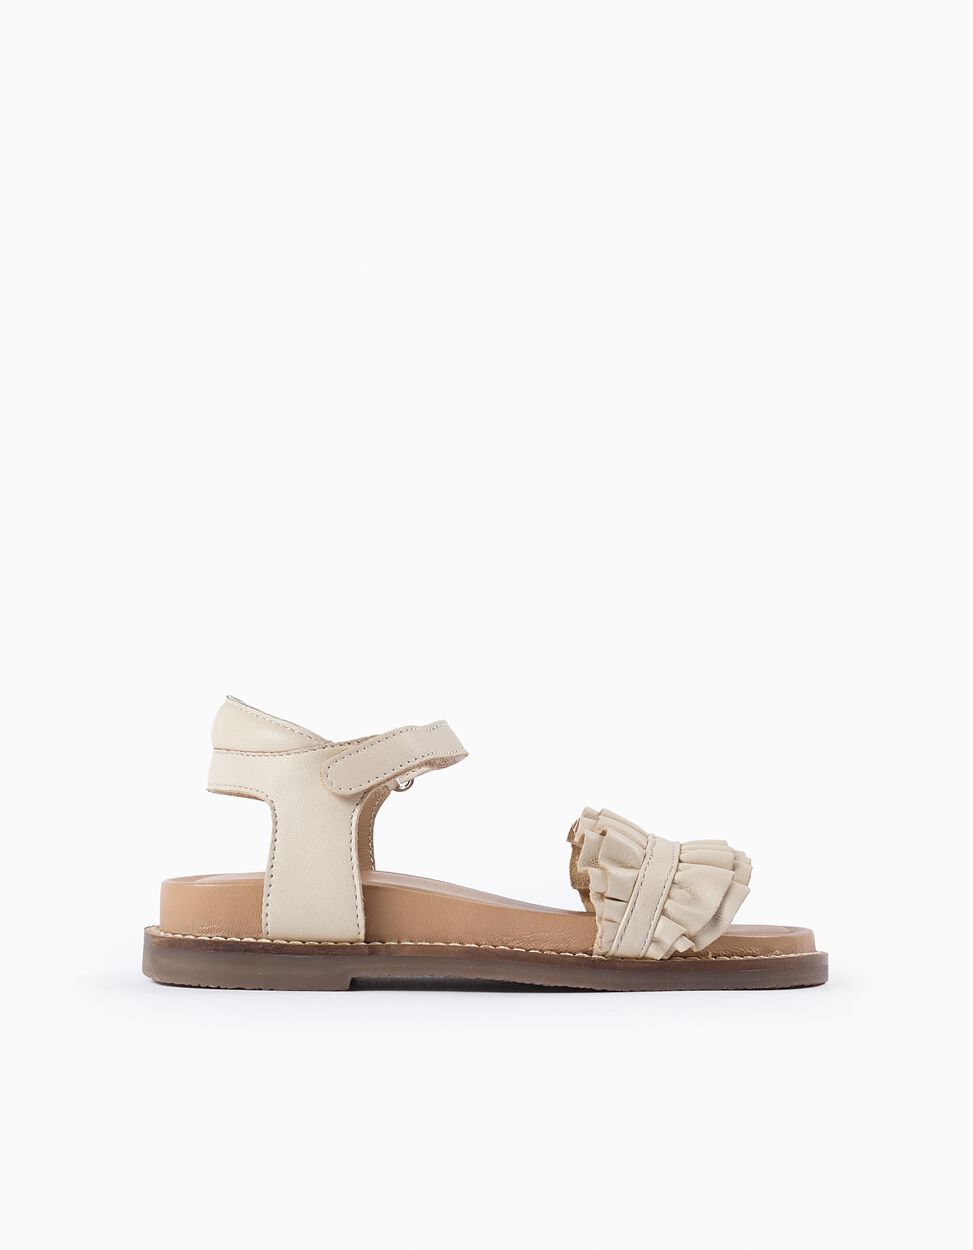 Buy Online Leather Sandals with Ruffles for Girls, Beige